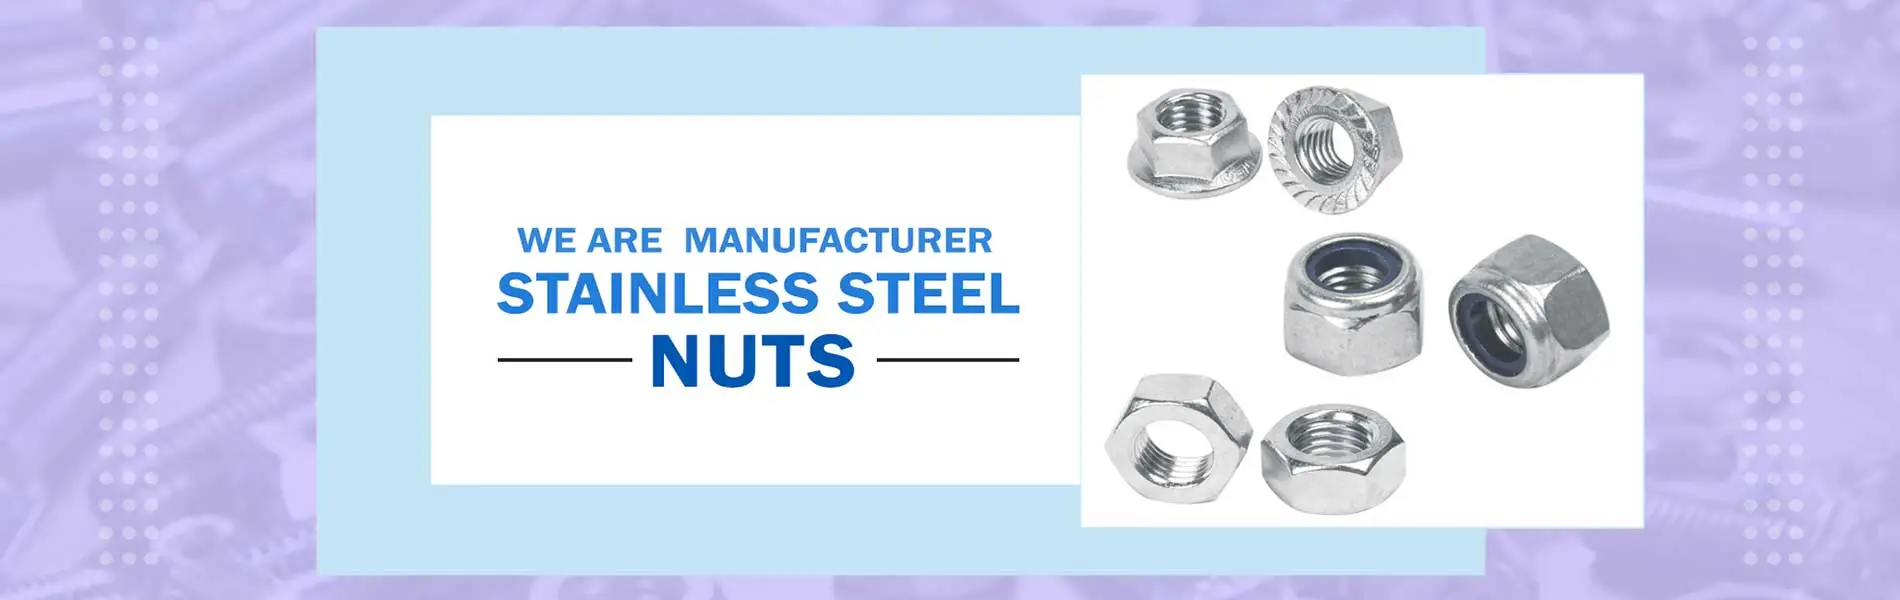 Stainless Steel Nuts Manufacturers